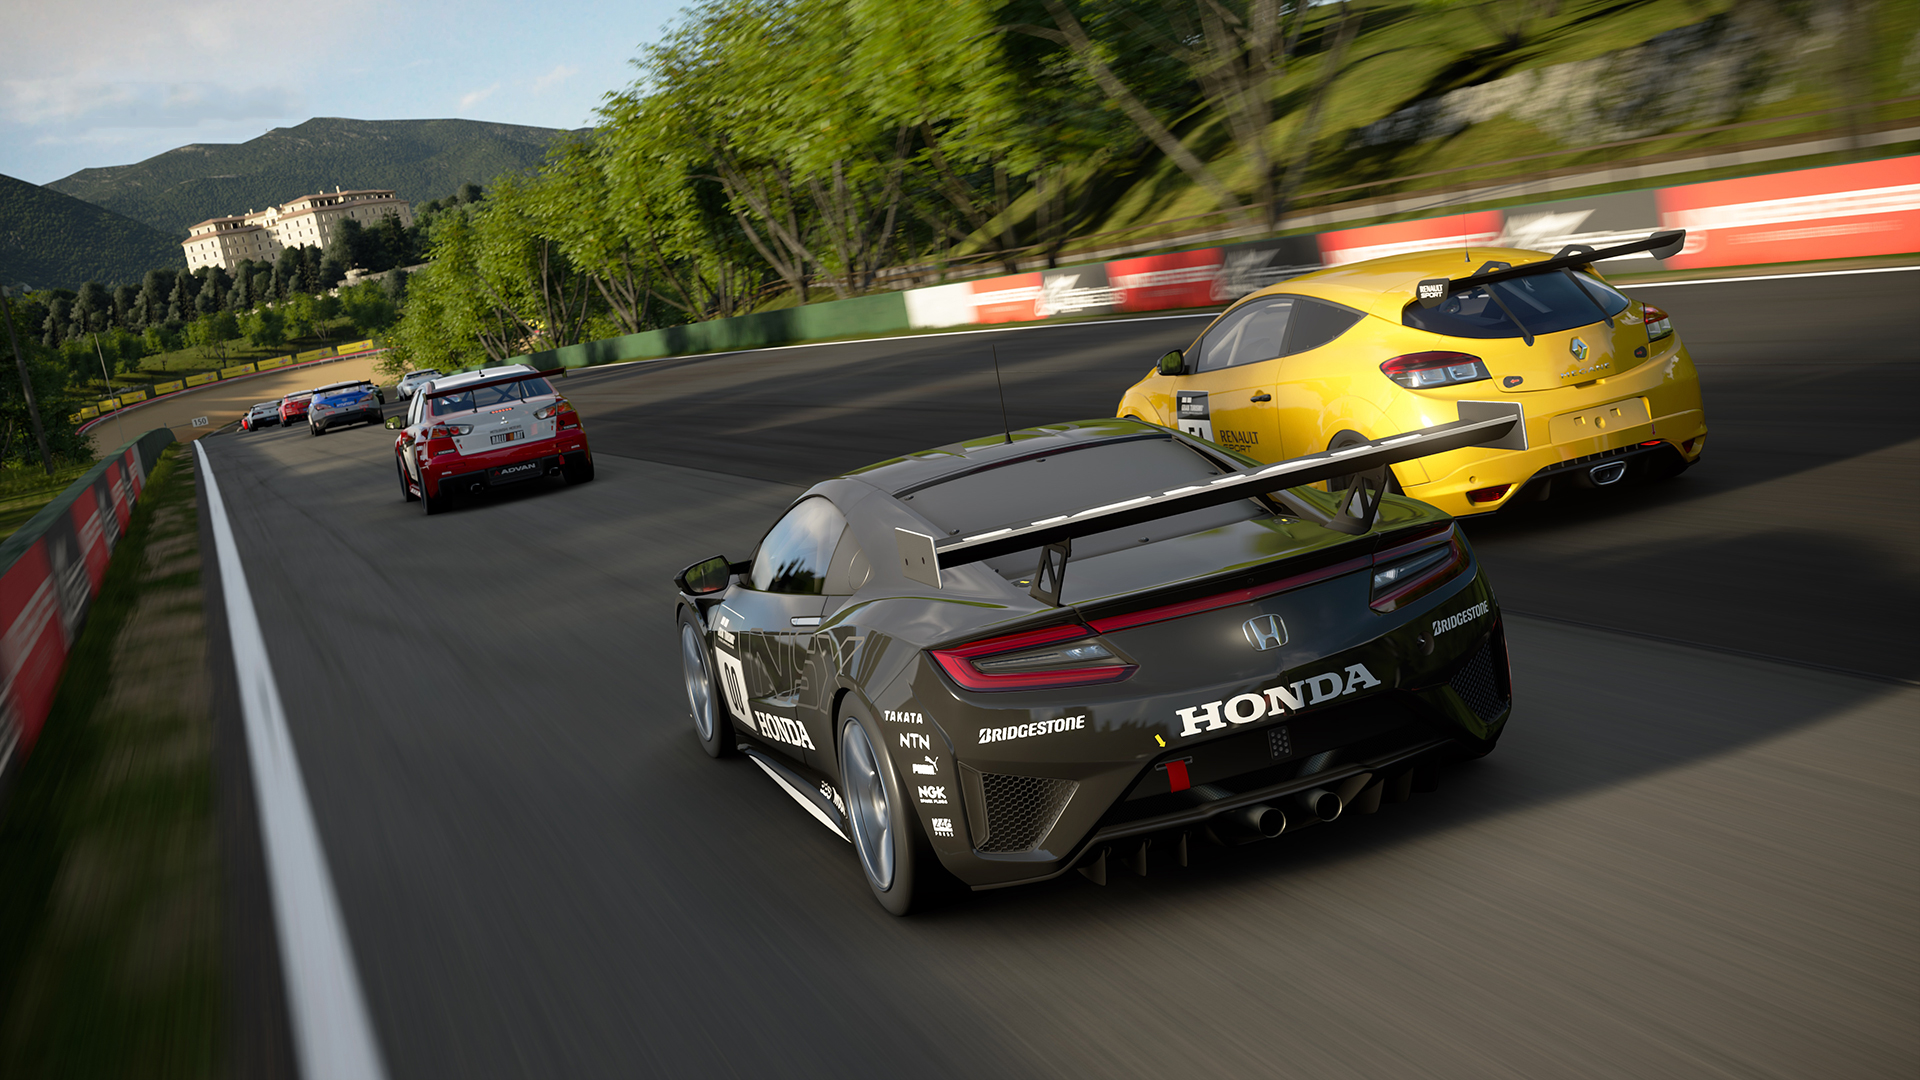 Gran Turismo 7: Release date, 8K demo, PSVR 2.0 support and everything else we know